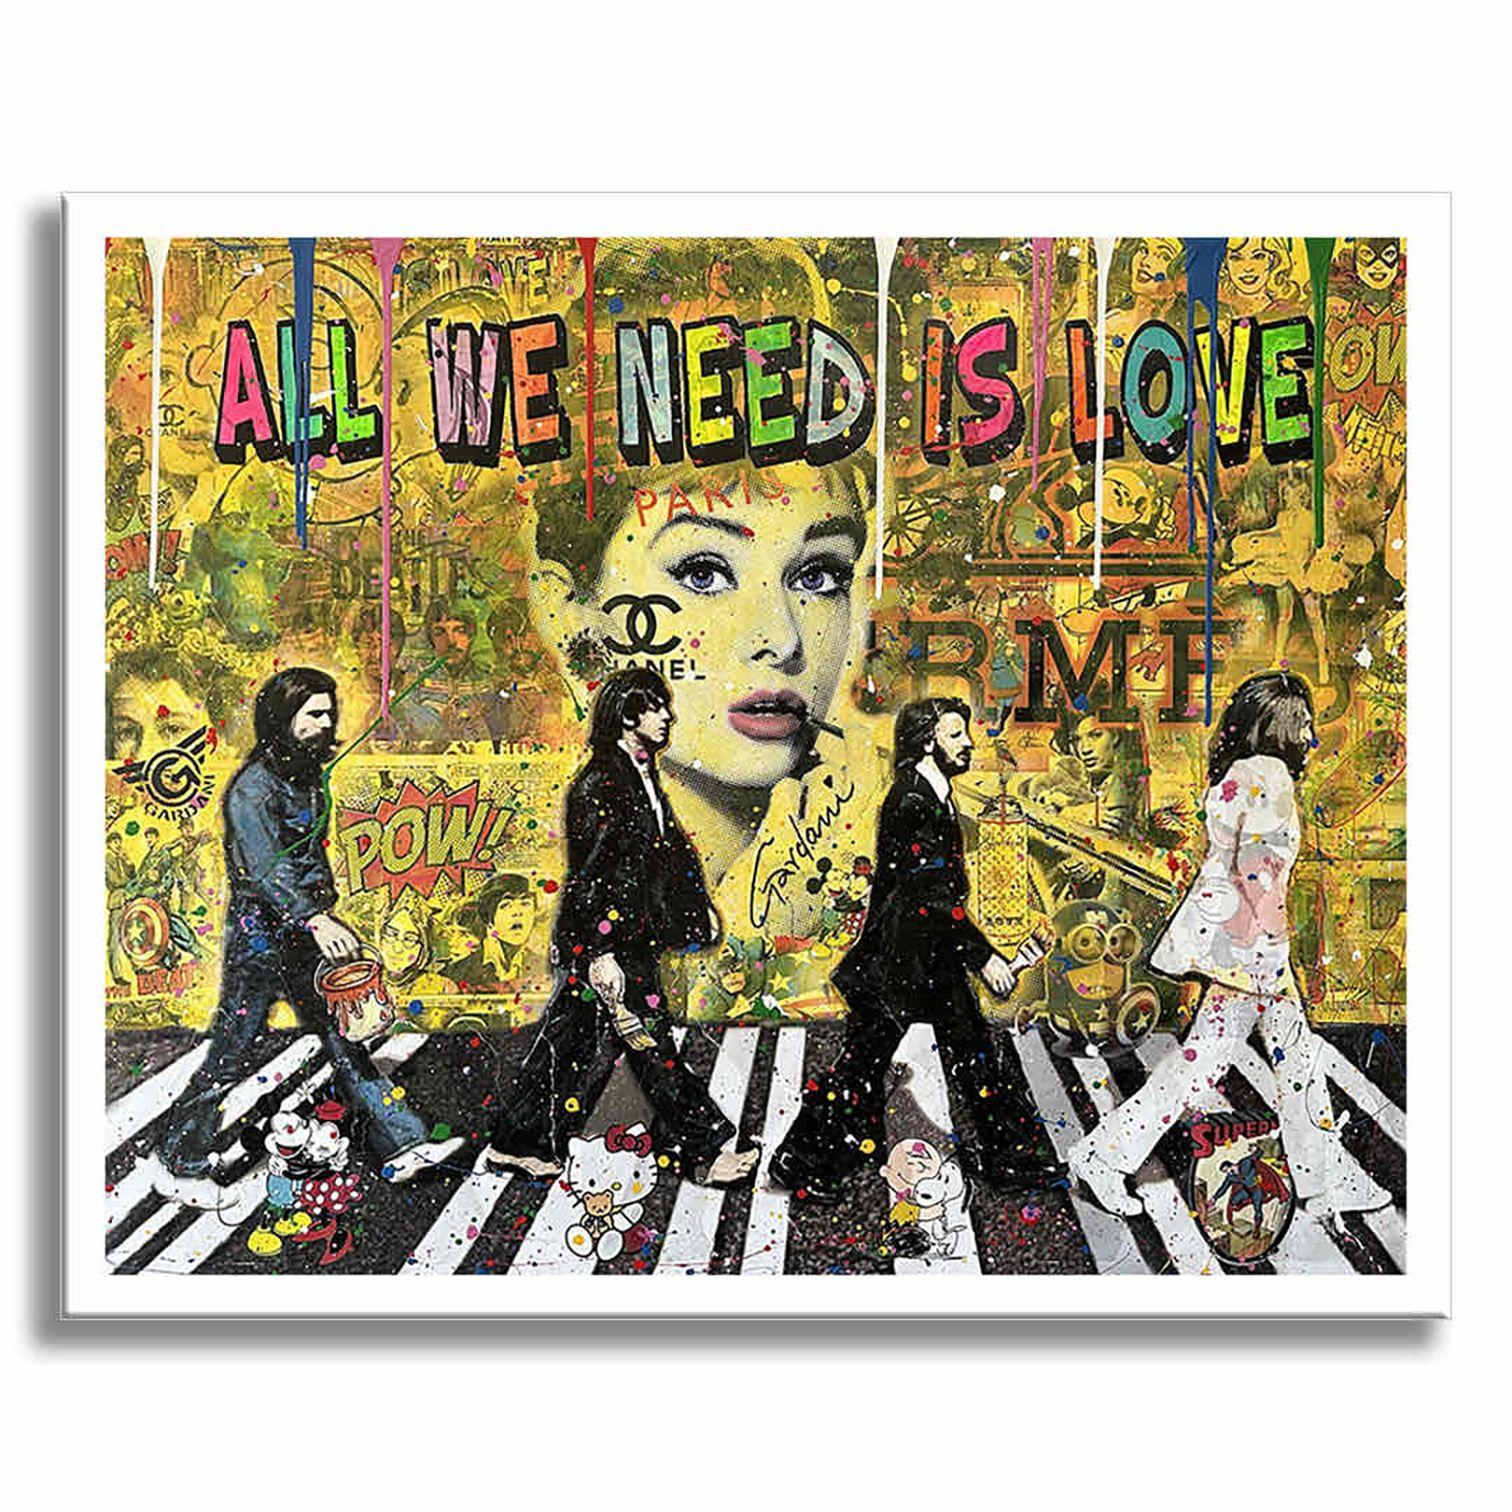 Each morning Beatles â€“ Original Painting on canvas, Painting, Acrylic on Canva For Sale 4